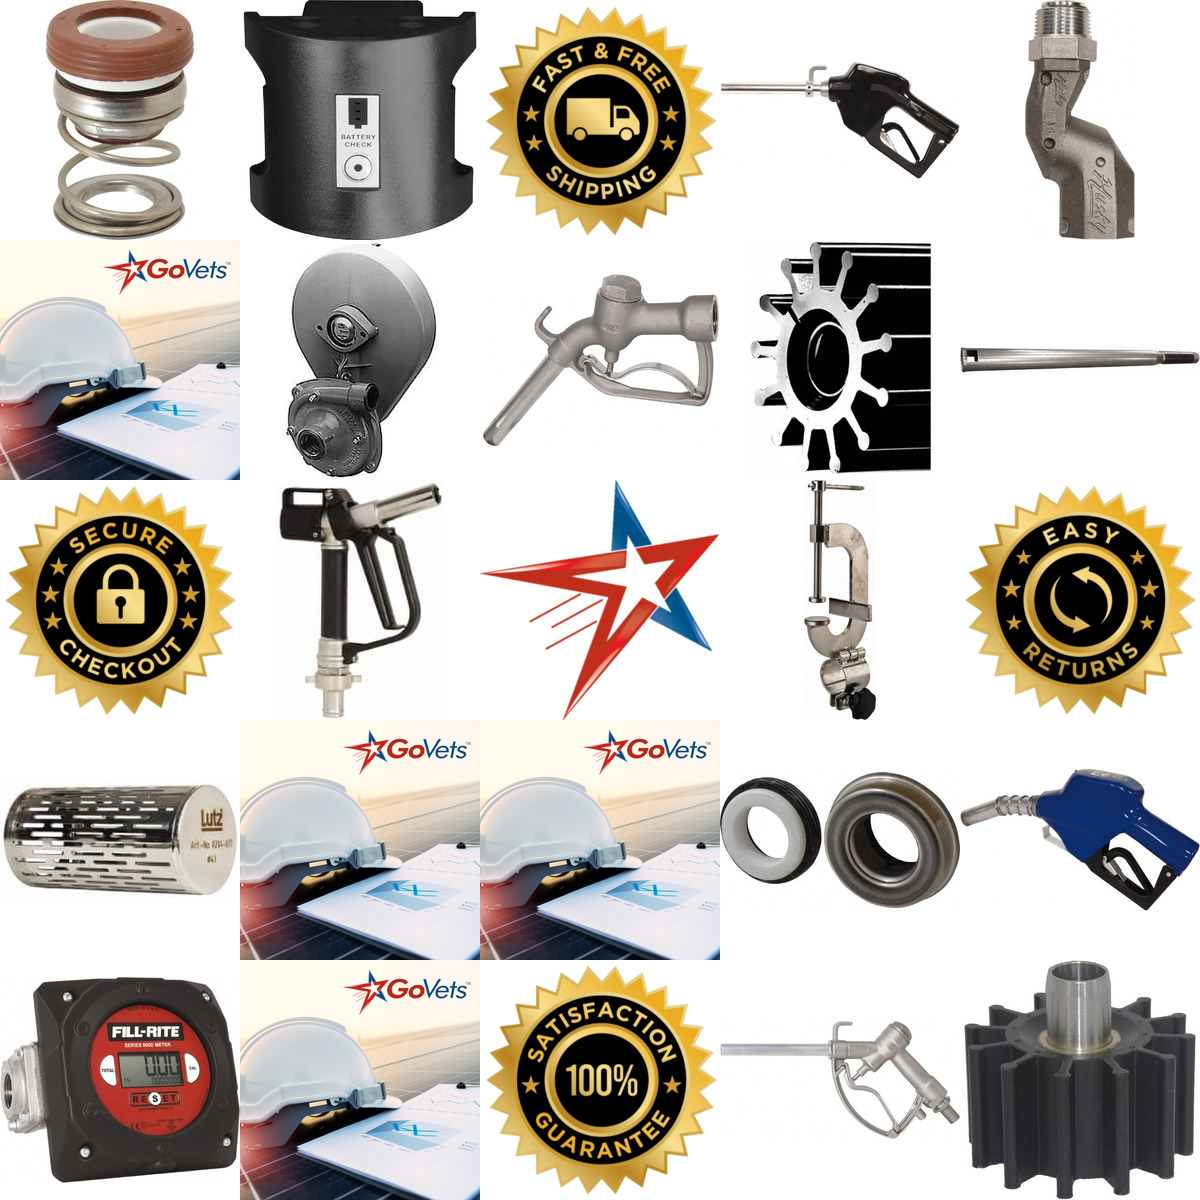 A selection of Repair Parts products on GoVets